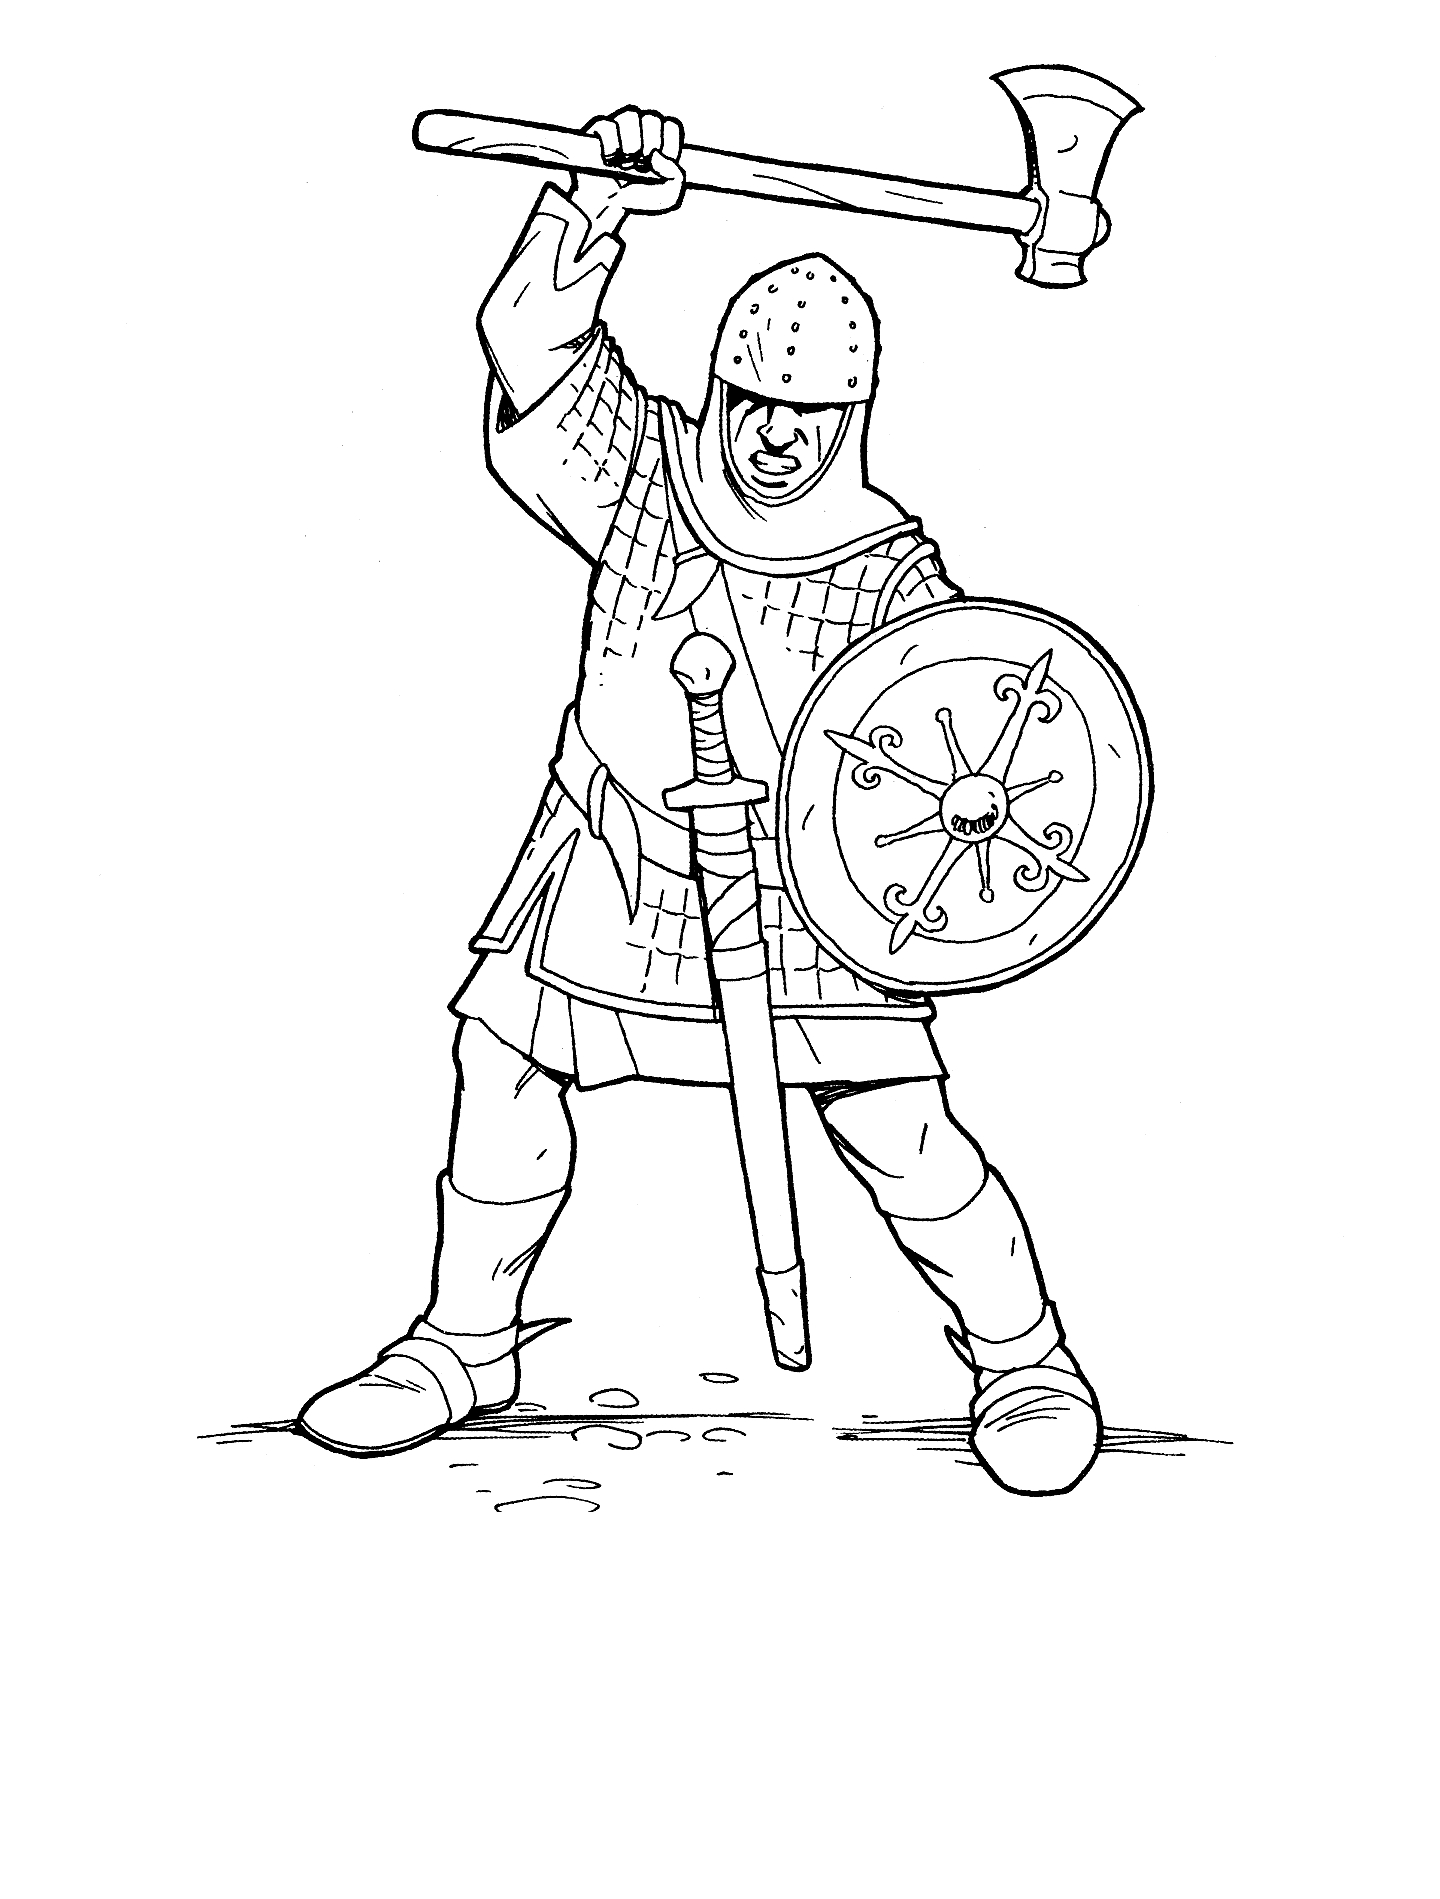 Knights Coloring Pages Soldier Printable Coloring Pages For Kids And For Adults